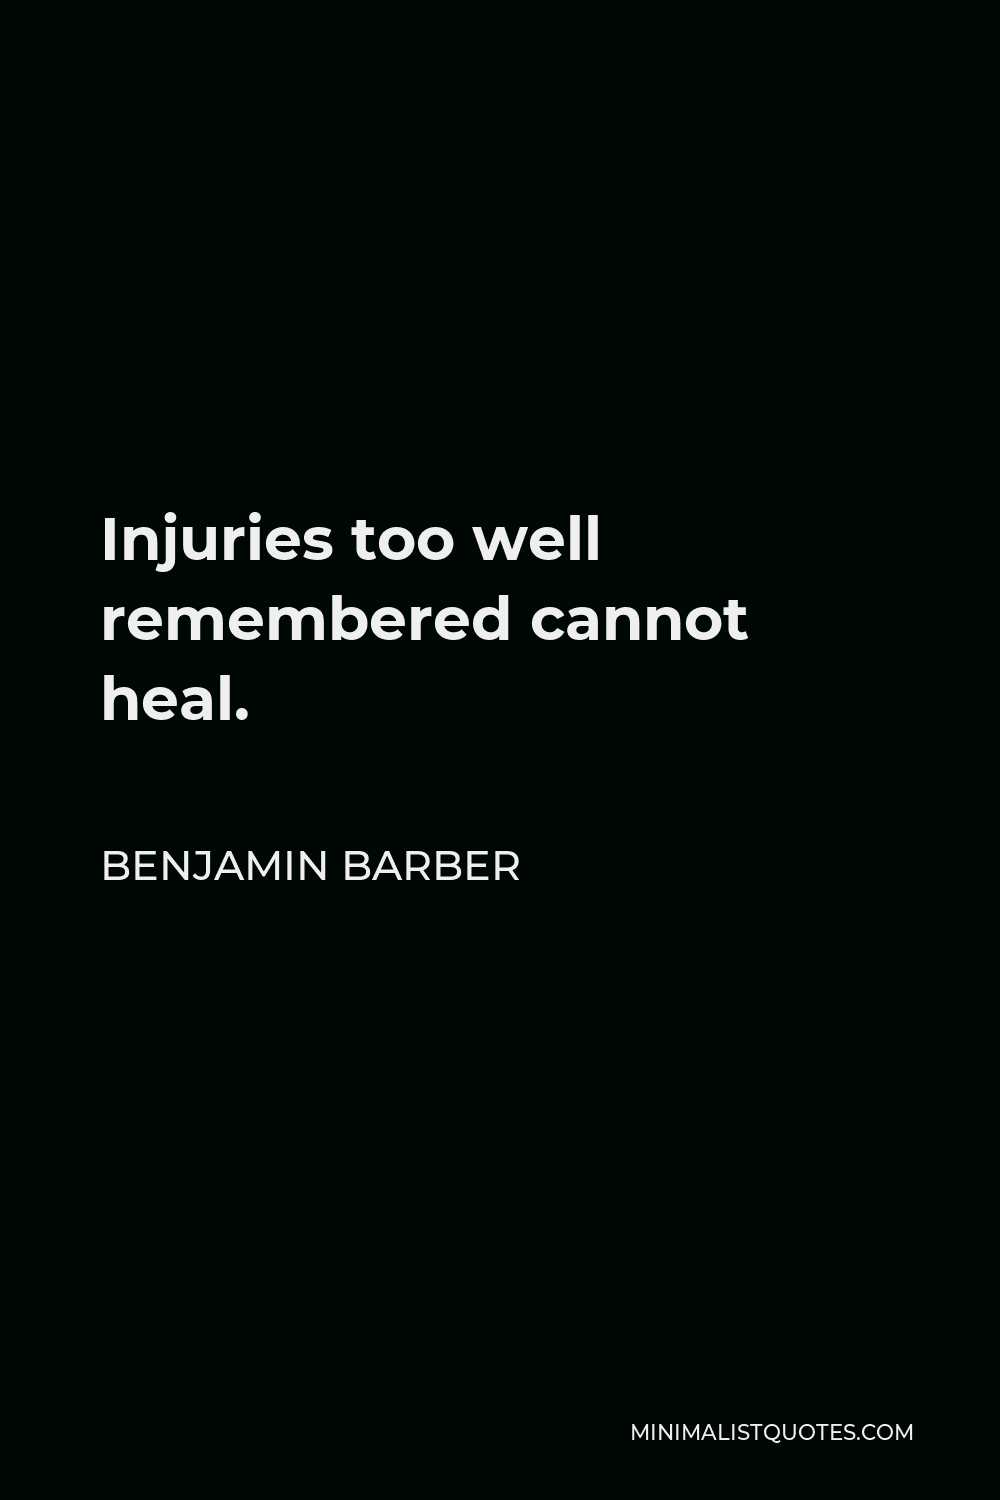 Benjamin Barber Quote - Injuries too well remembered cannot heal.